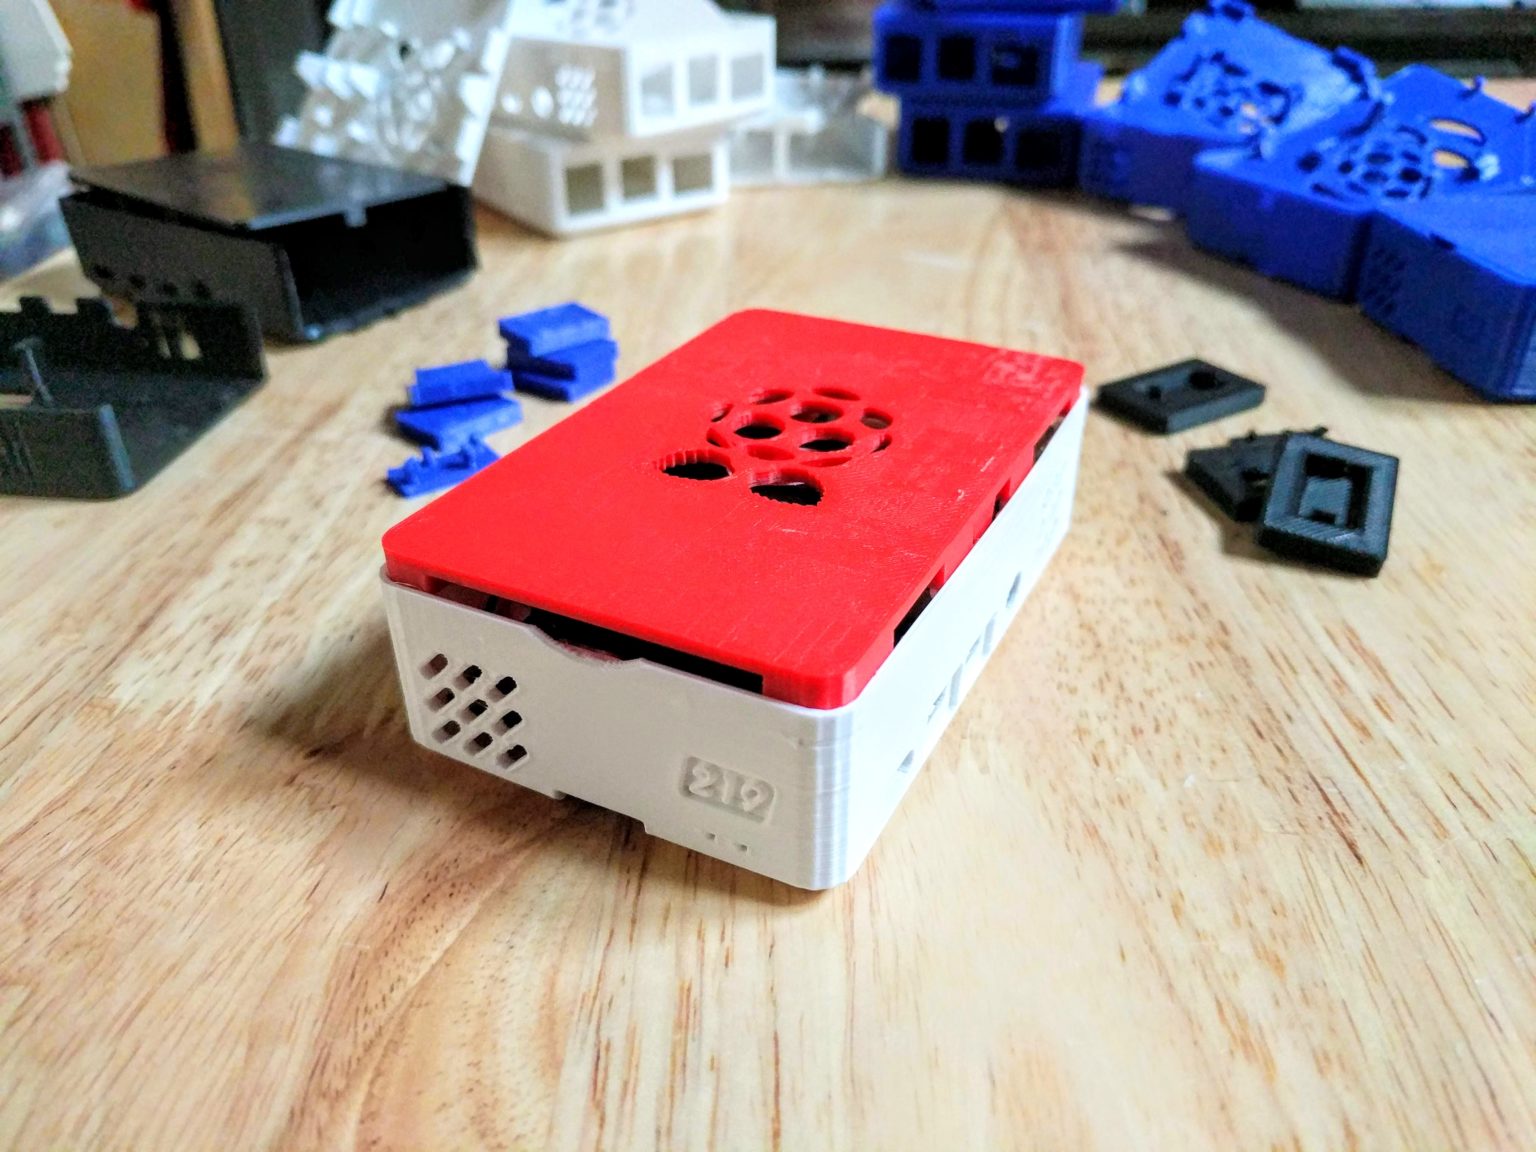 Raspberry Pi 3D Printed Case to Cool from 219 Design - IMG 20200115 132611 1 1536x1152